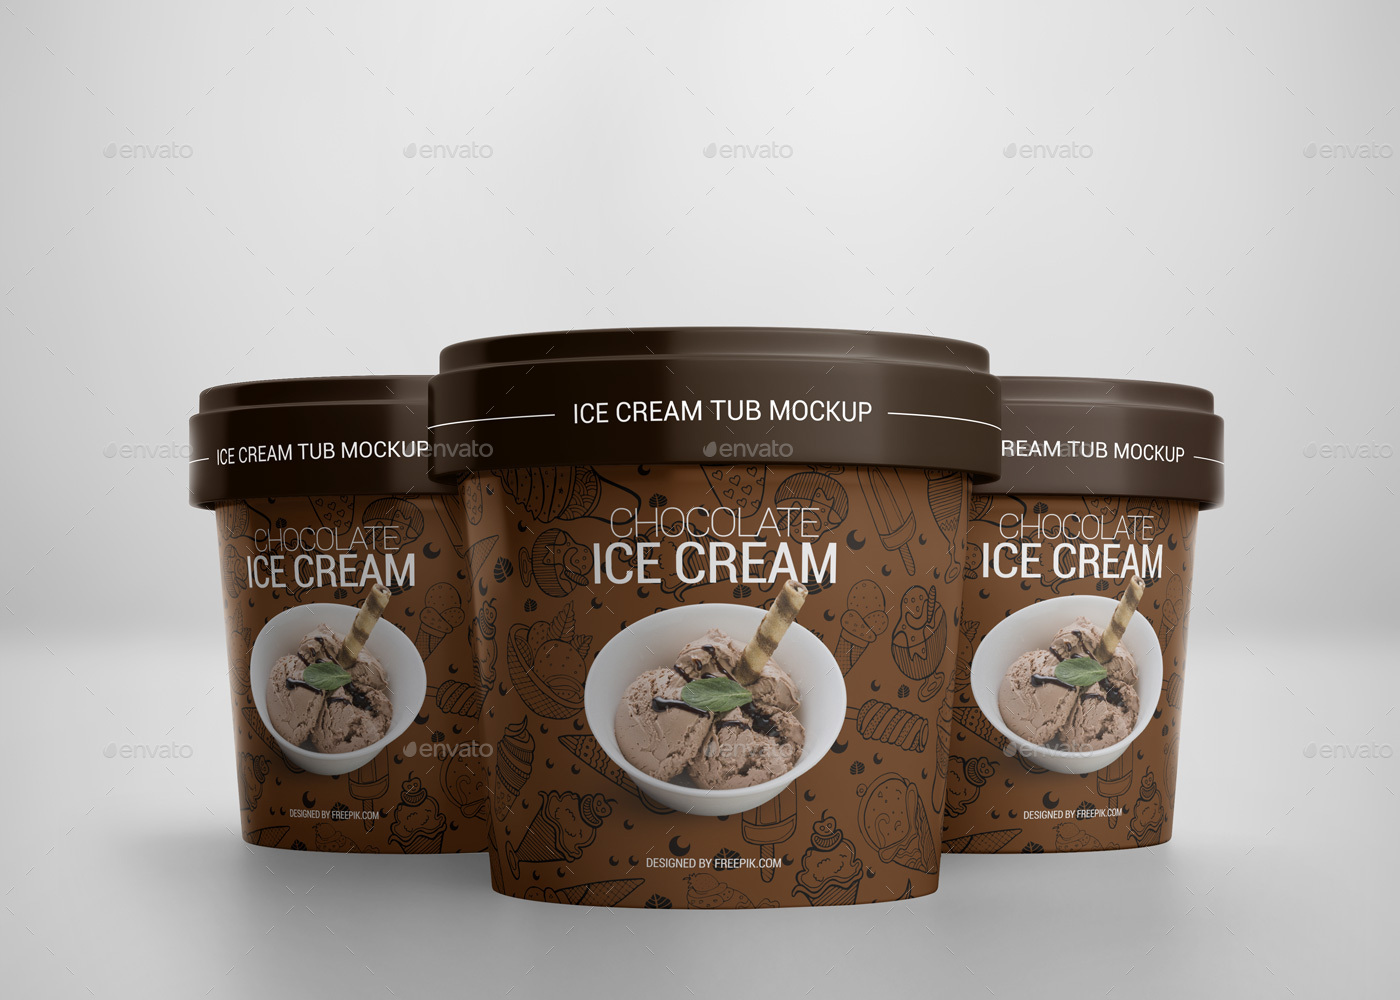 Download Ice Cream Cup Mockup by Pixelica21 | GraphicRiver